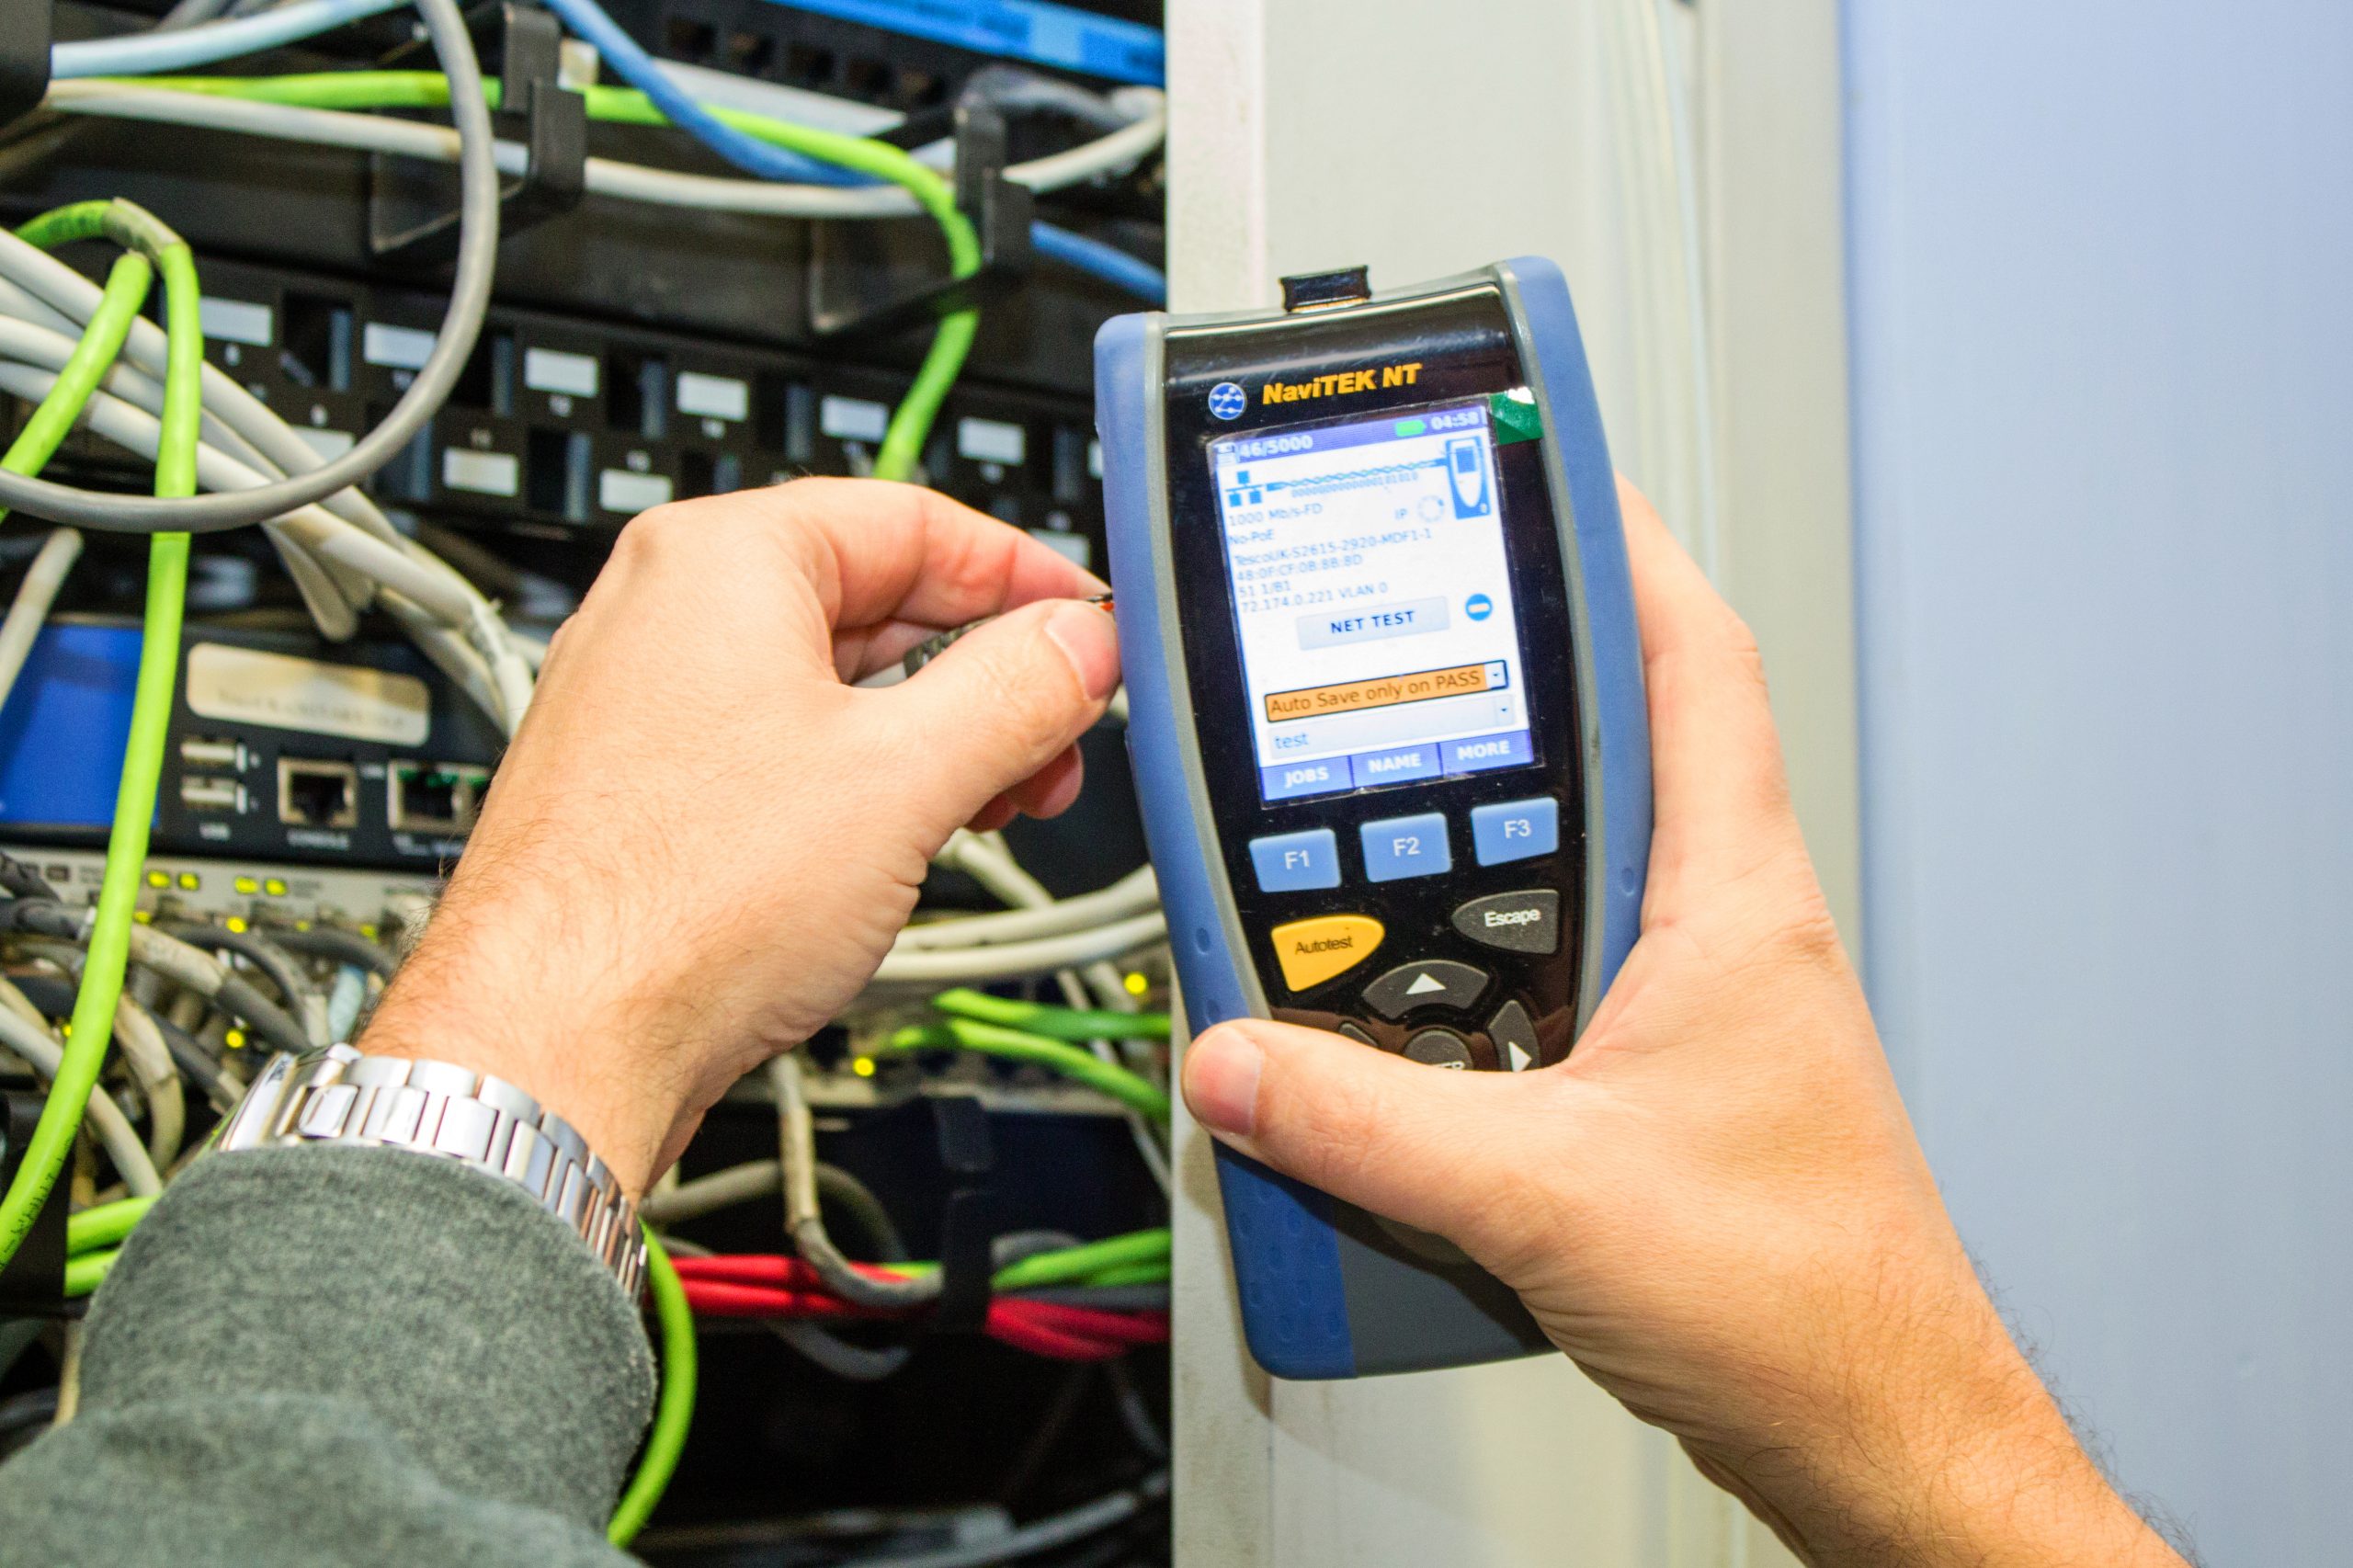 ISG Technology, a network service business, has experienced benefits beyond cost effectiveness and time saving, when installing cables and network troubleshooting, with the IDEAL Networks handheld NaviTEK NT Pro.